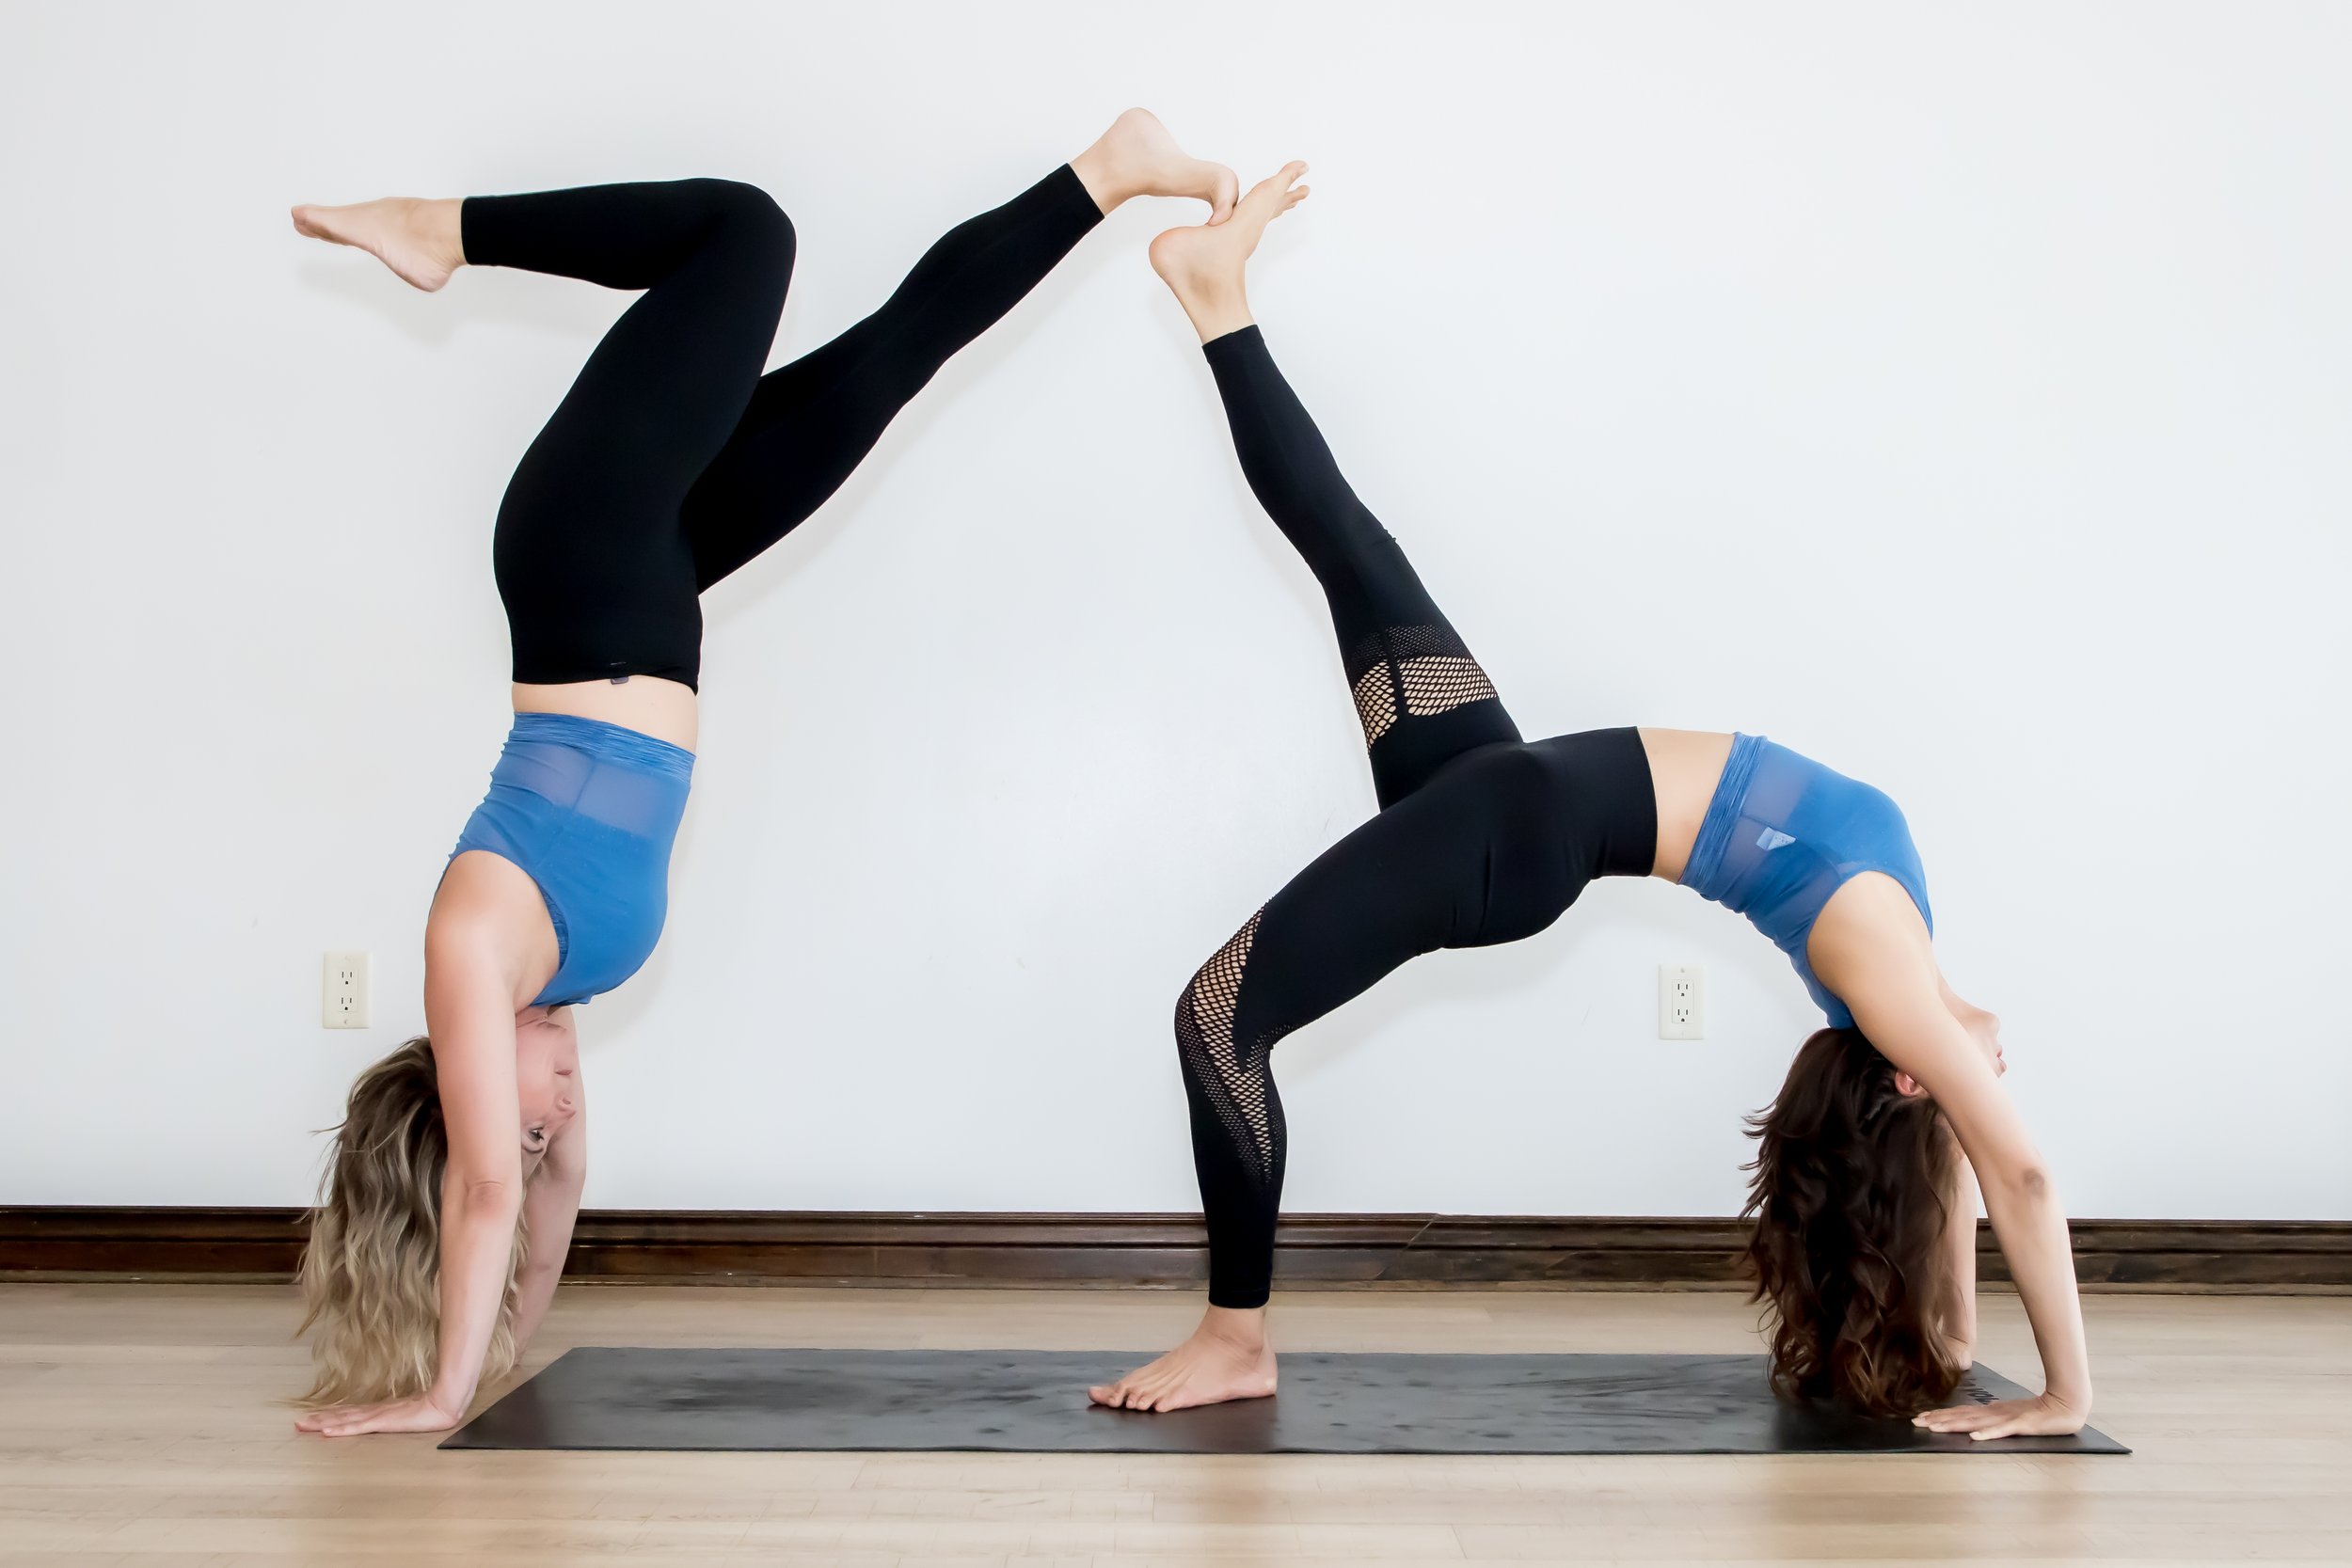 About — Bare Yoga And Athletics